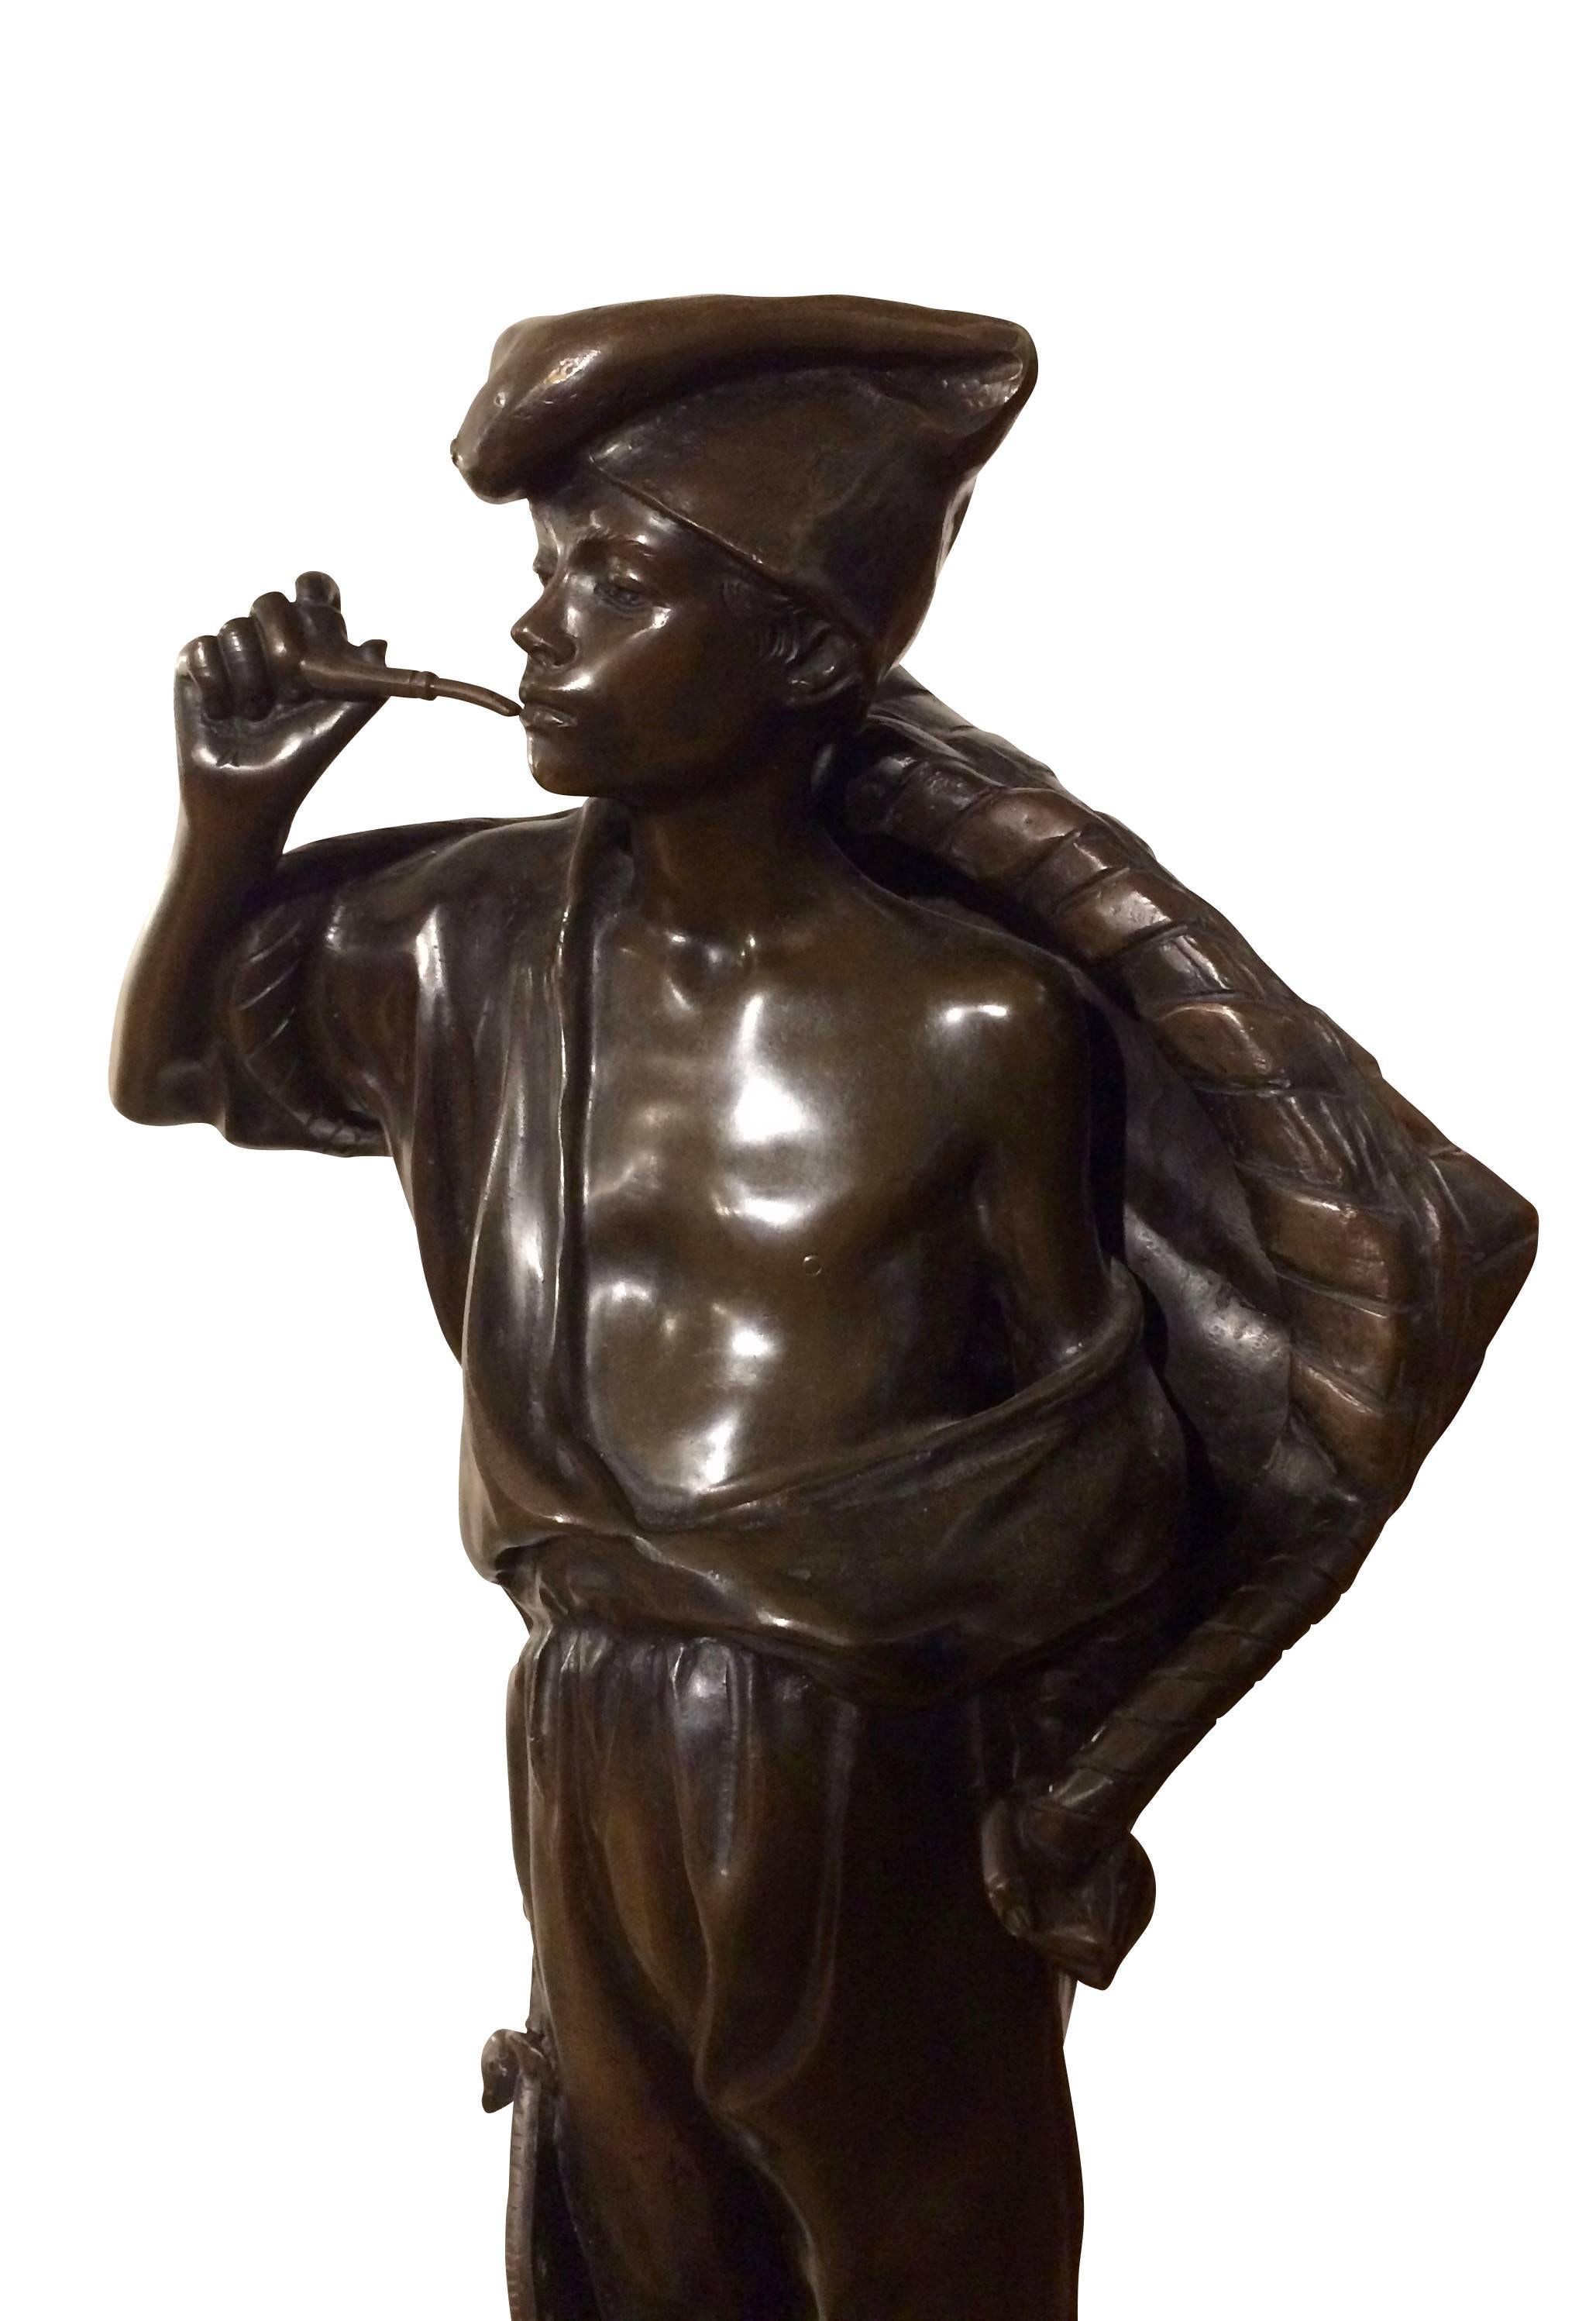 Achille Dorsi (1845-1922) Neapel.

 A young fisherman with pipe, bronze sculpture, signed on ground, black marble base, bronze.